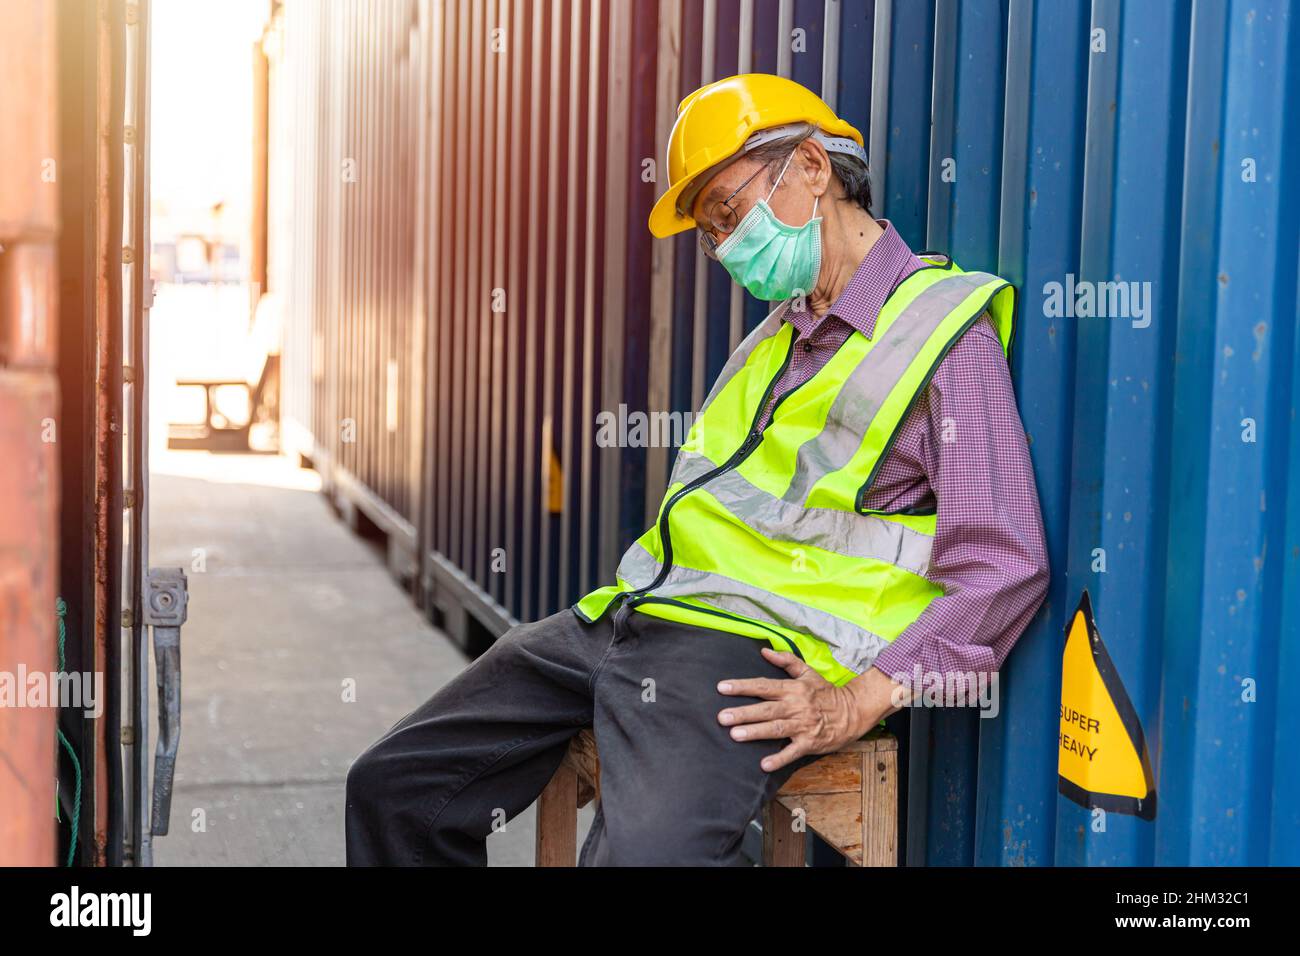 Fatigue old man worker nap sleep at work from tired exhausted hard working Stock Photo